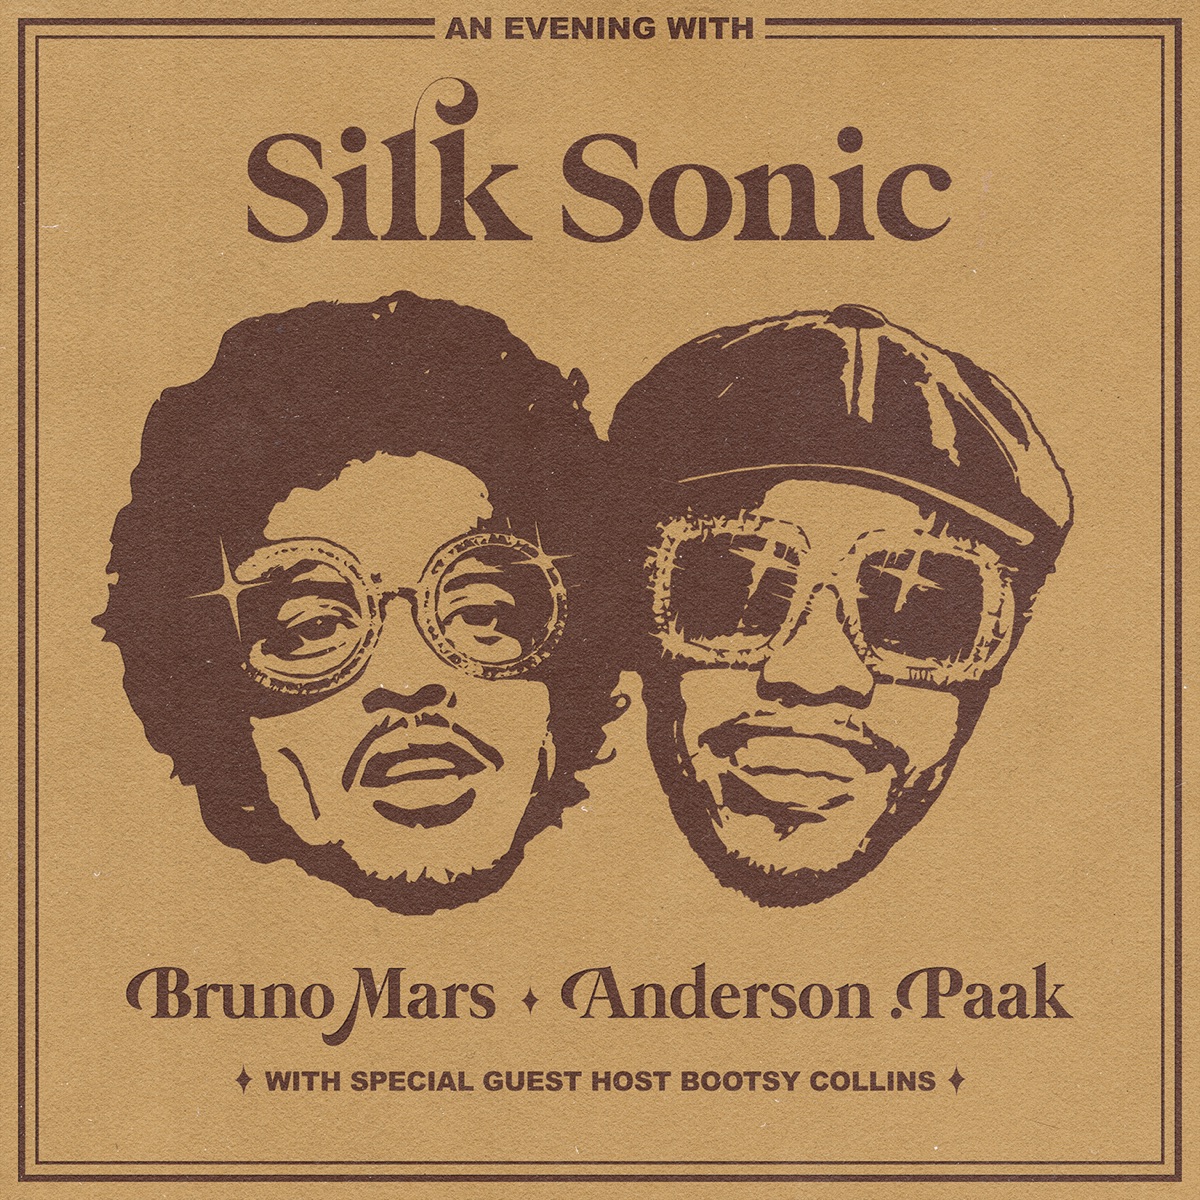 Cover for『Bruno Mars, Anderson .Paak, Silk Sonic - Fly As Me』from the release『An Evening With Silk Sonic 』